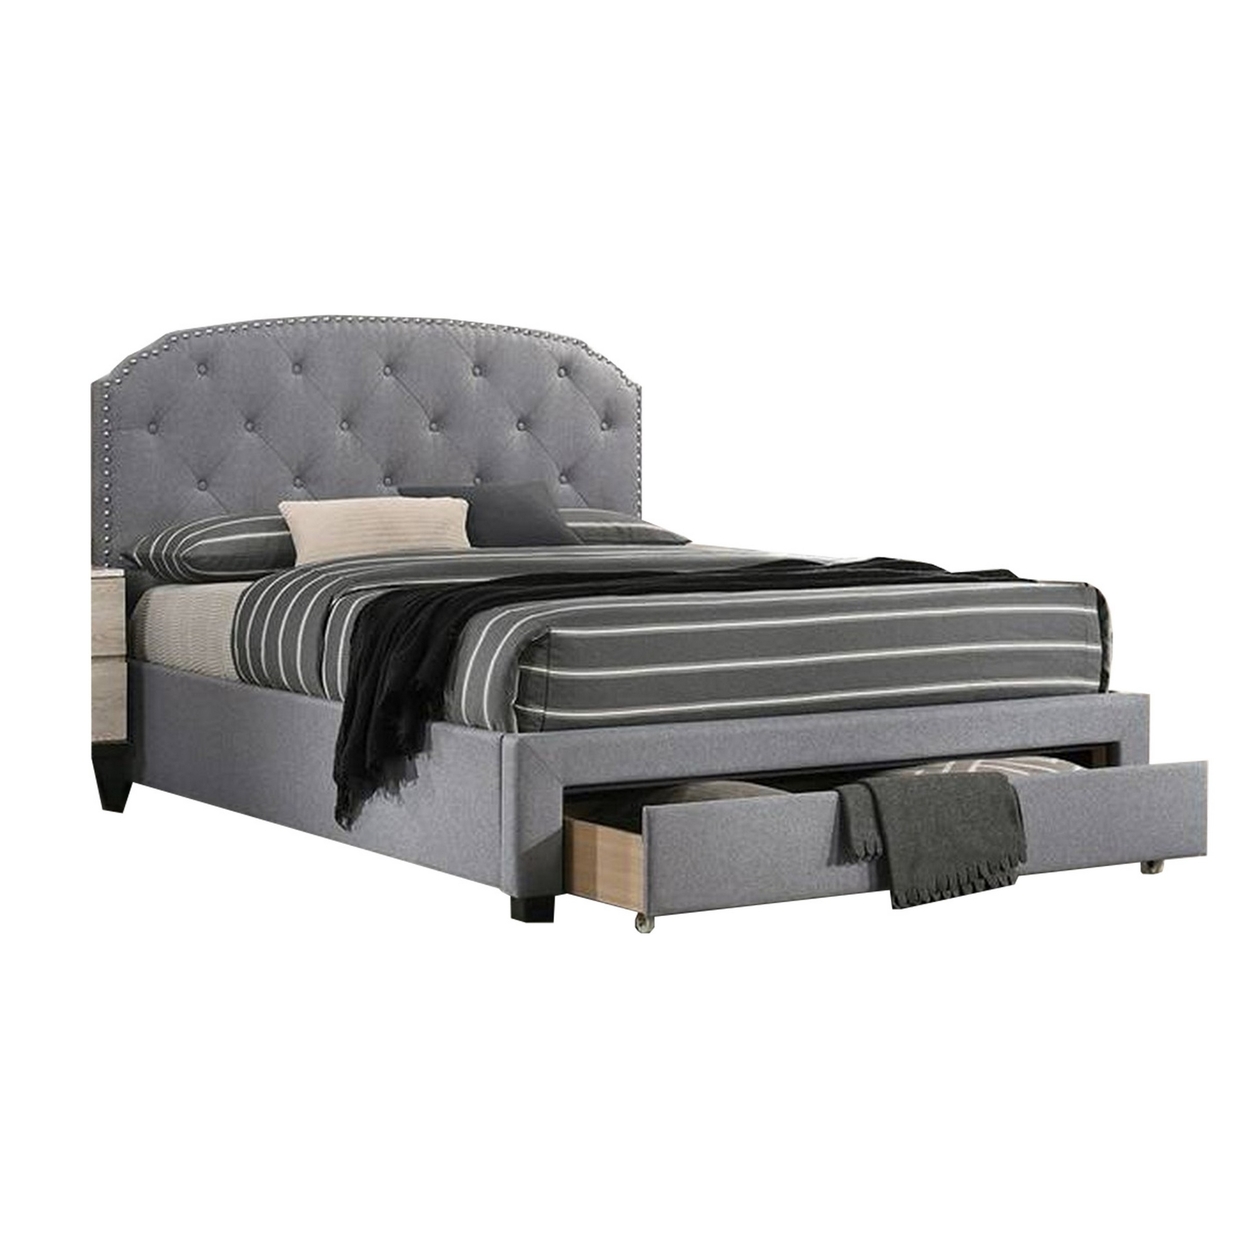 Nue Full Size Upholstered Bed With Curved Tufted Headboard, Gray Burlap- Saltoro Sherpi